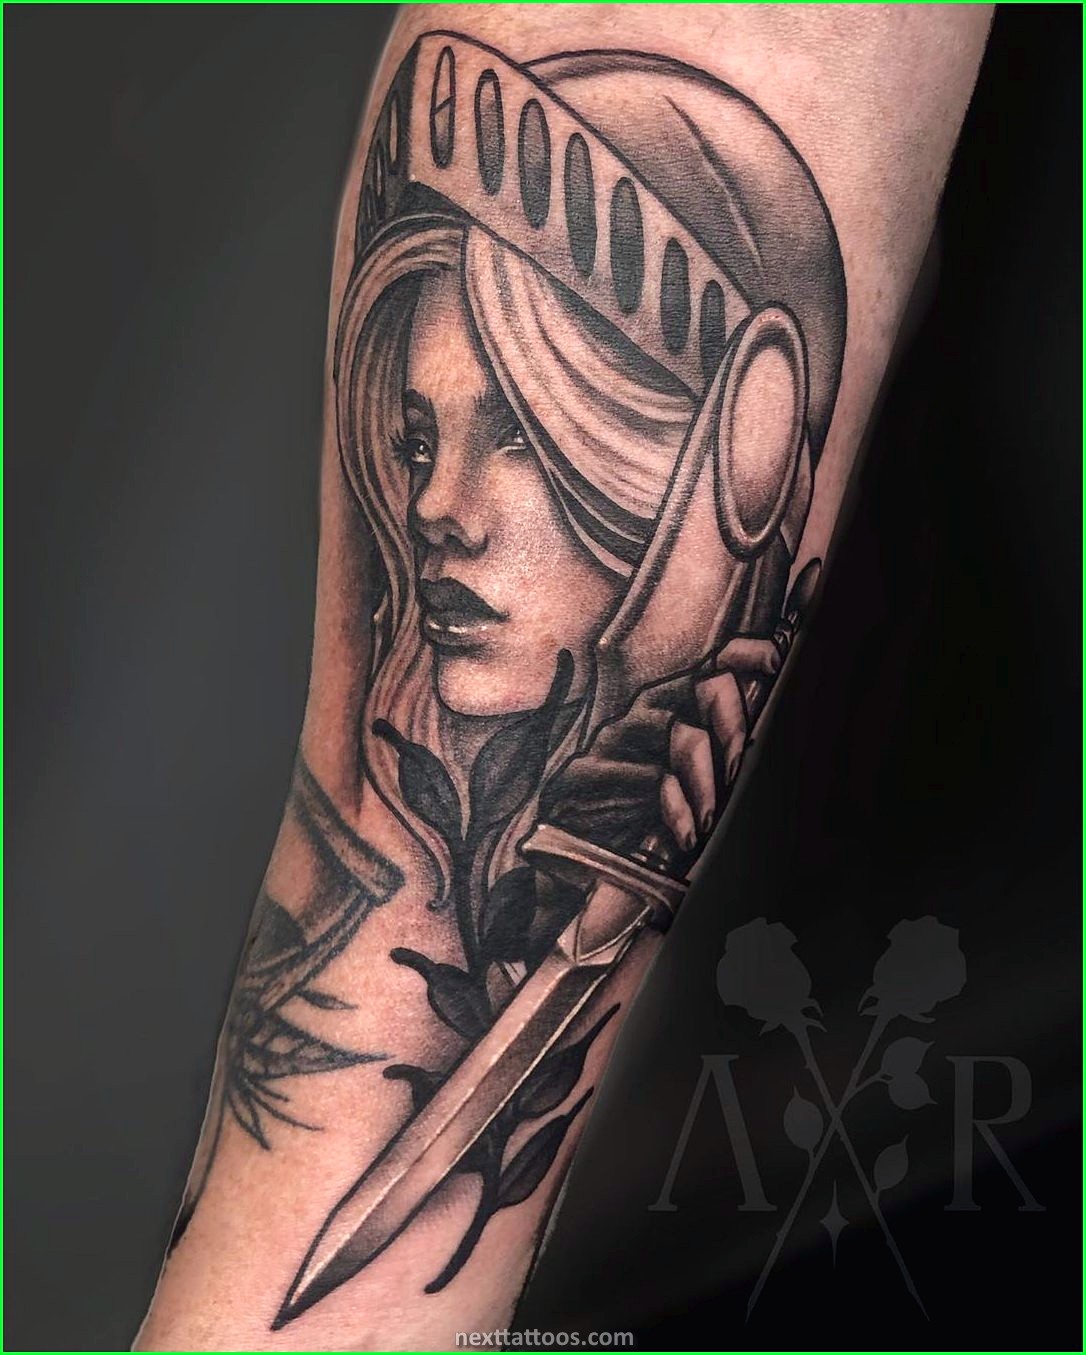 Female Warrior Tattoo Ideas and Meaning